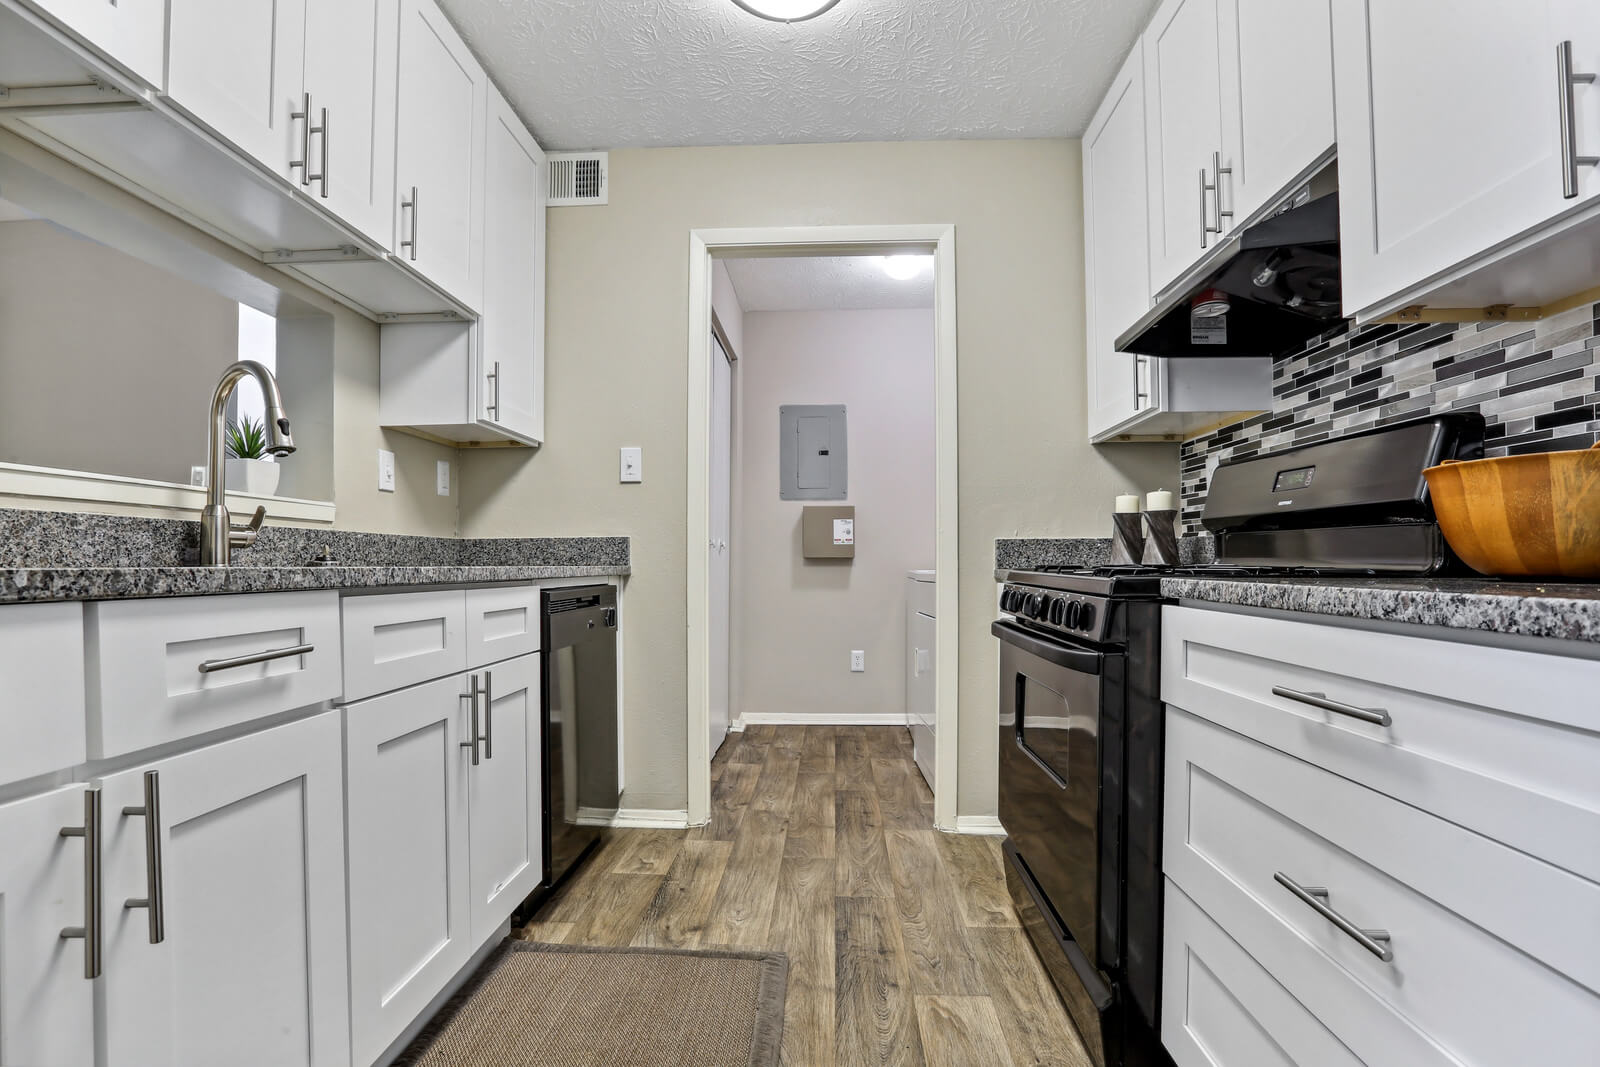 newly renovated kitchen with hardwood finish flooring and white cabinetry